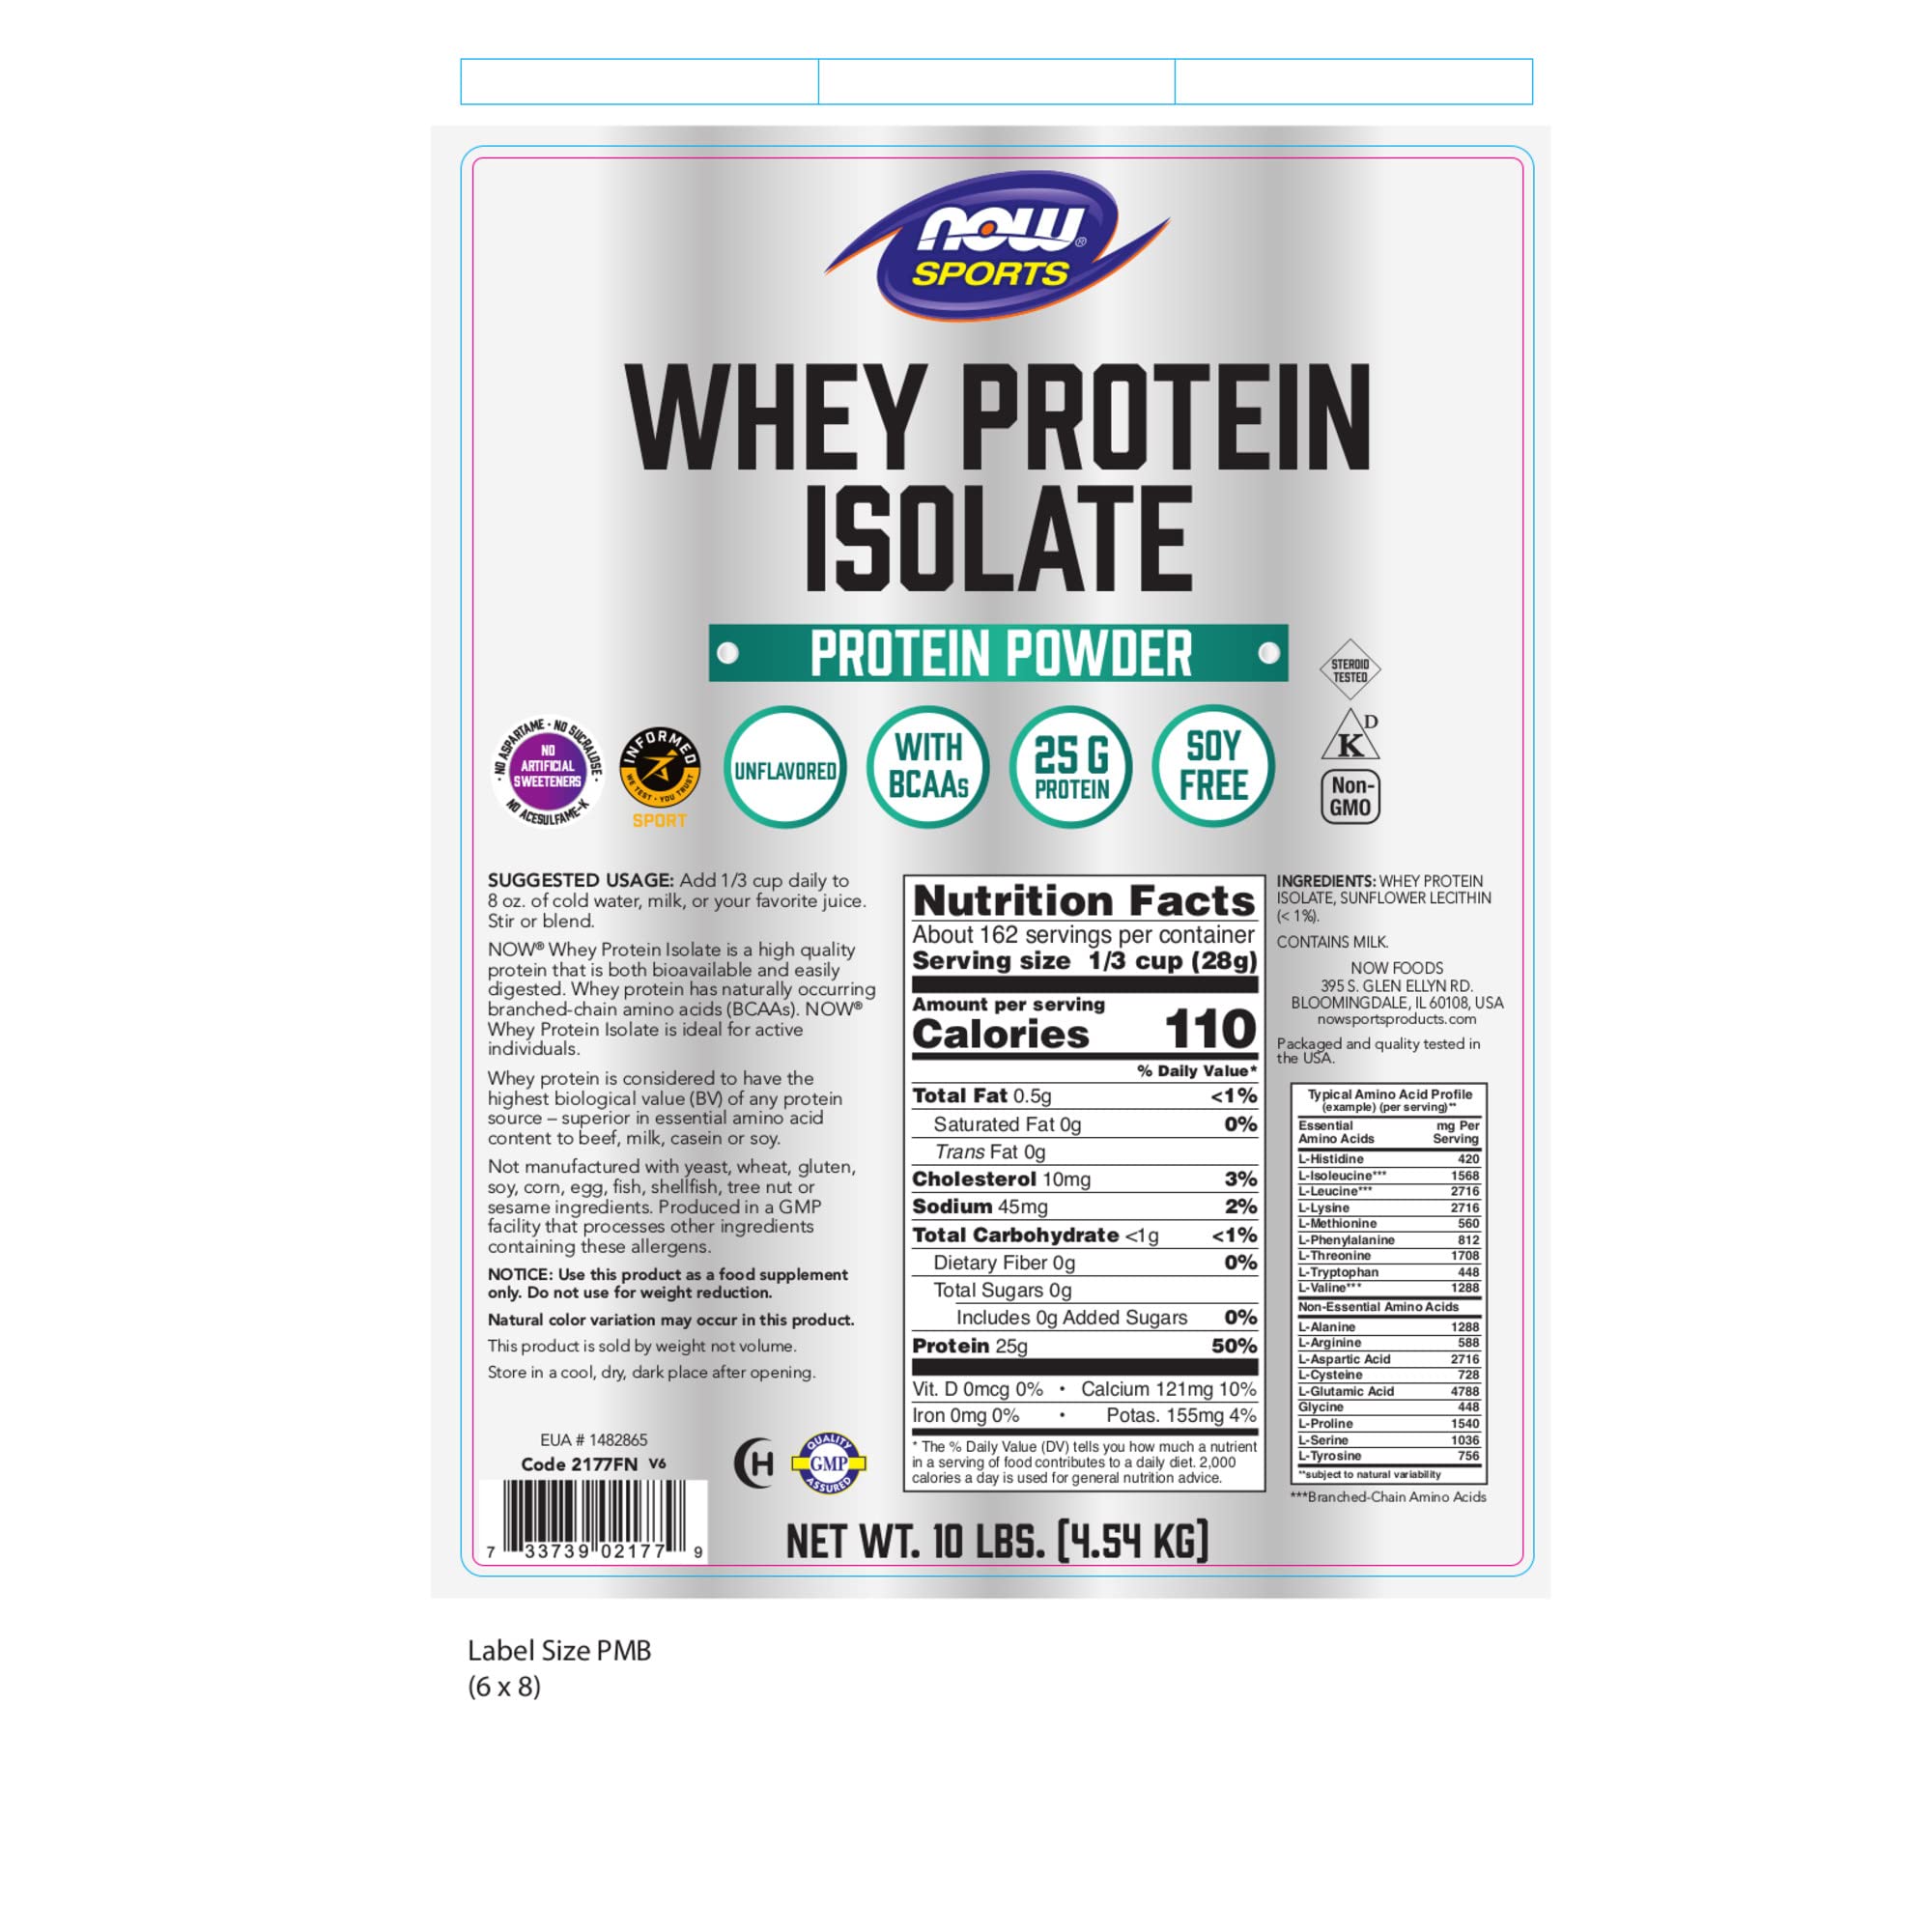 NOW Sports Nutrition, Whey Protein Isolate, 25 g With BCAAs, Unflavored Powder, 10-Pound